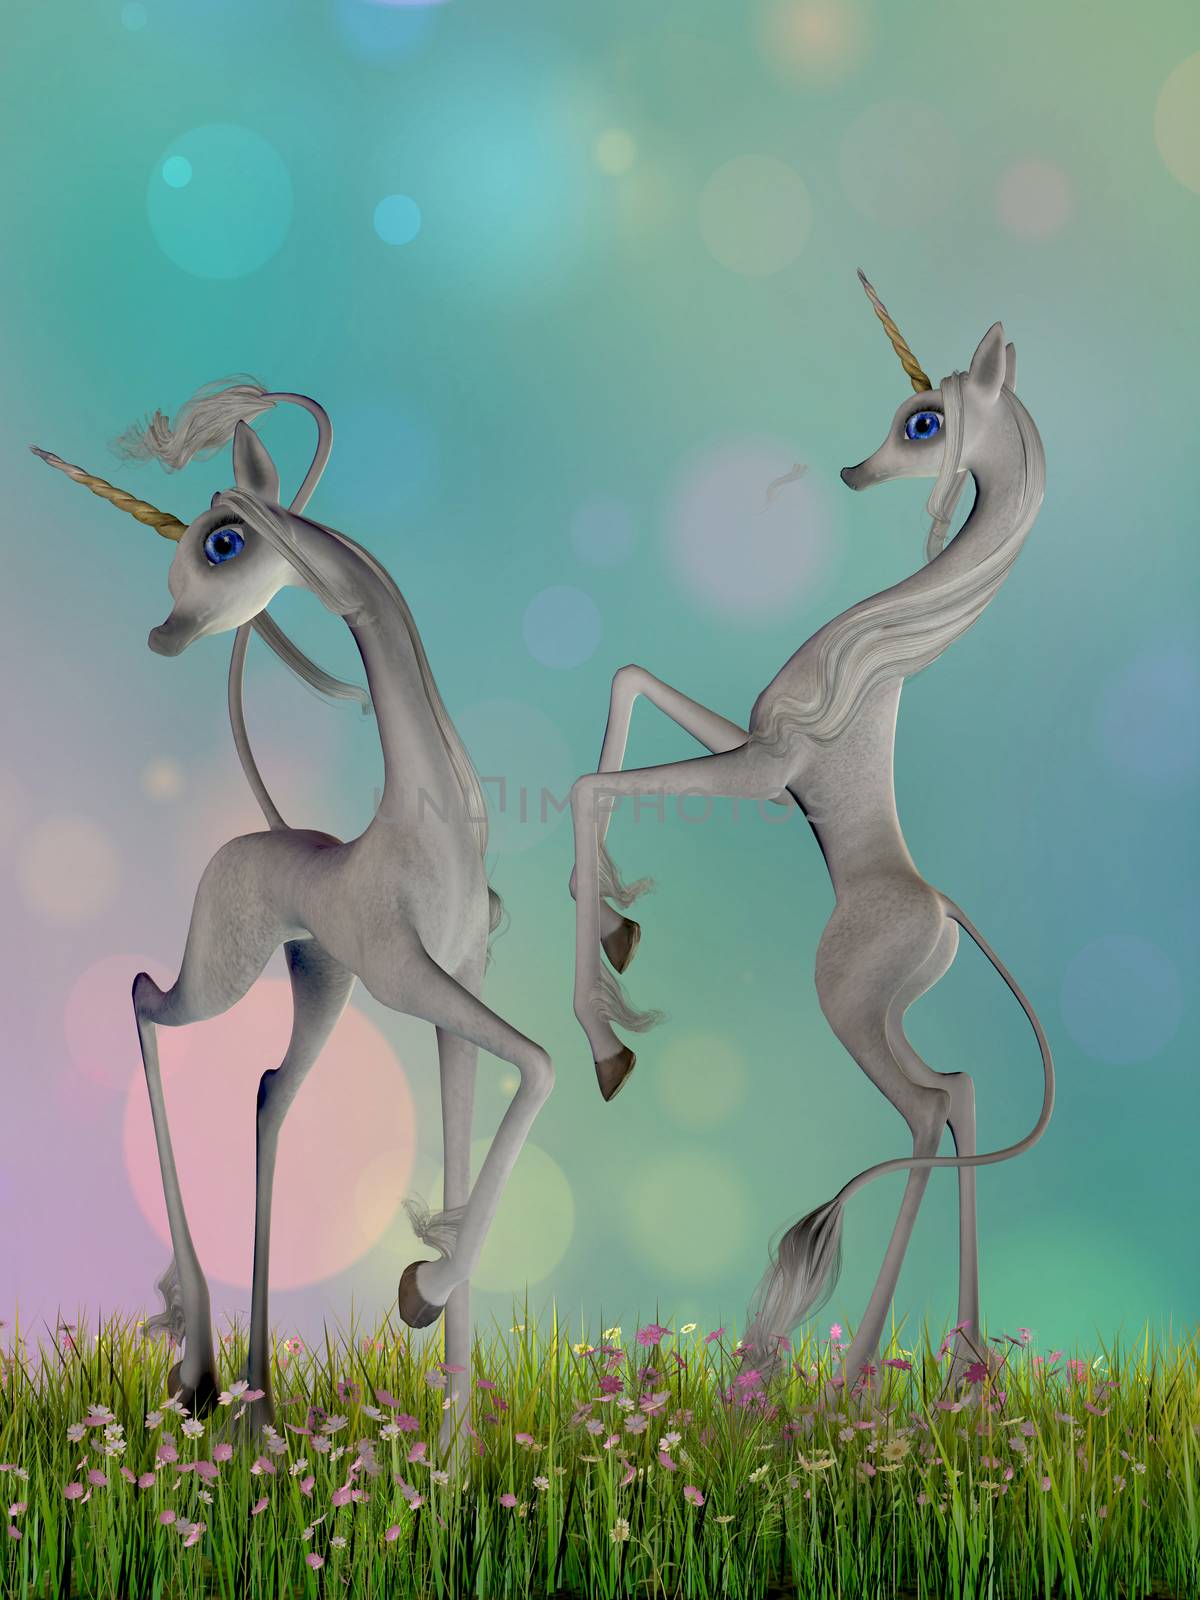 Two cartoon unicorn creatures dance in a meadow full of flowers in a fantasy scene.